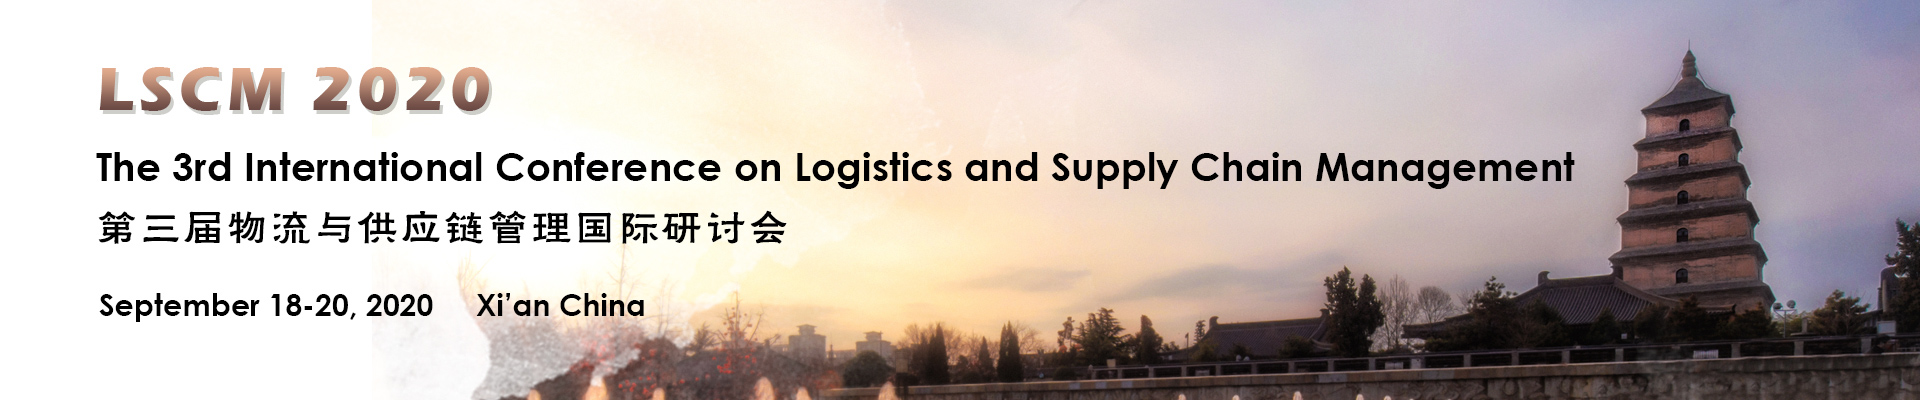 The 3rd International Conference on Logistics and Supply Chain Management (LSCM 2020), Xi'an, Shaanxi, China